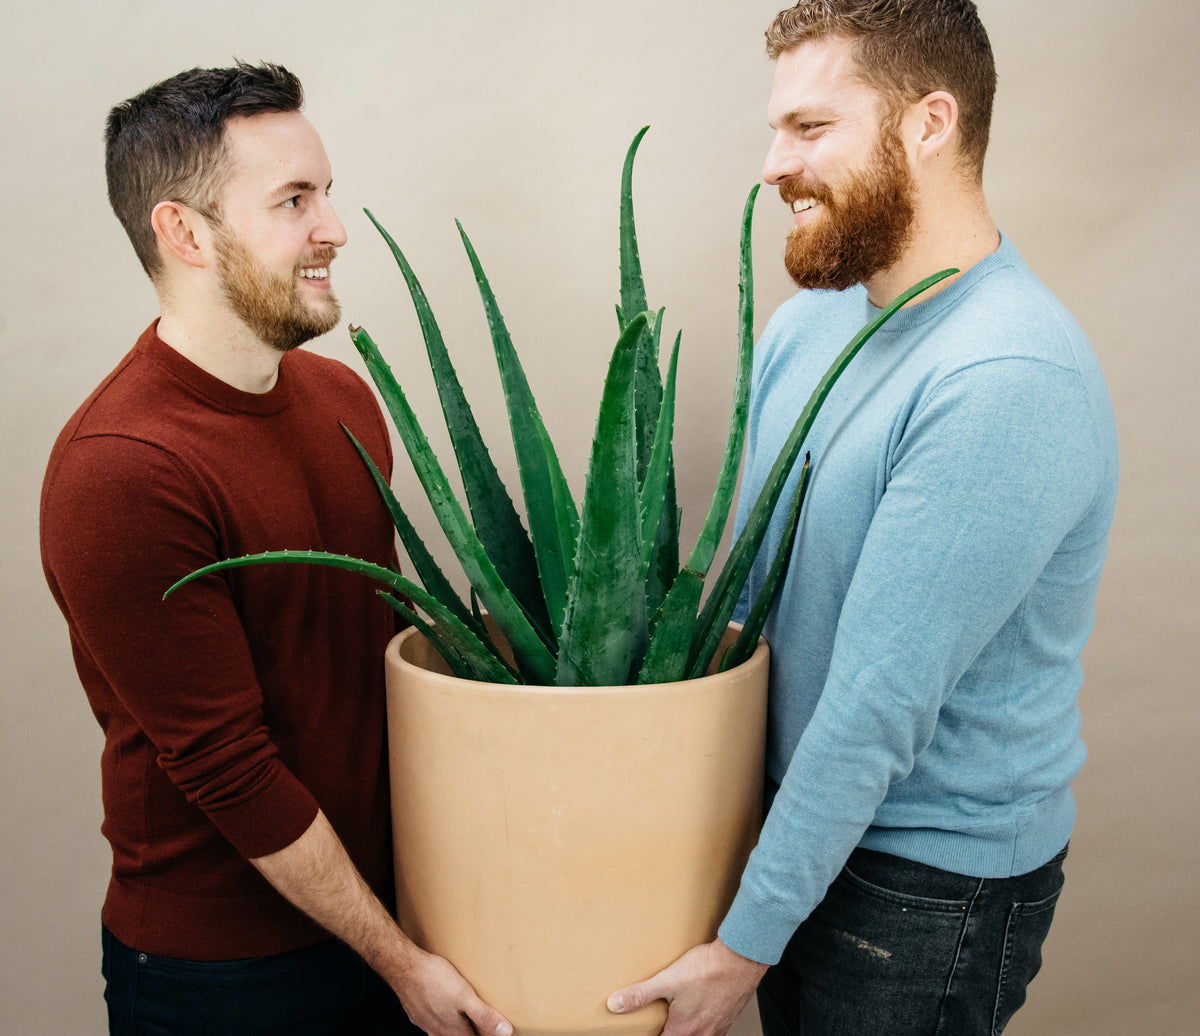 Two smiling men holding a large Aloe Vera plant in a terra cotta pot in front of a beige background.